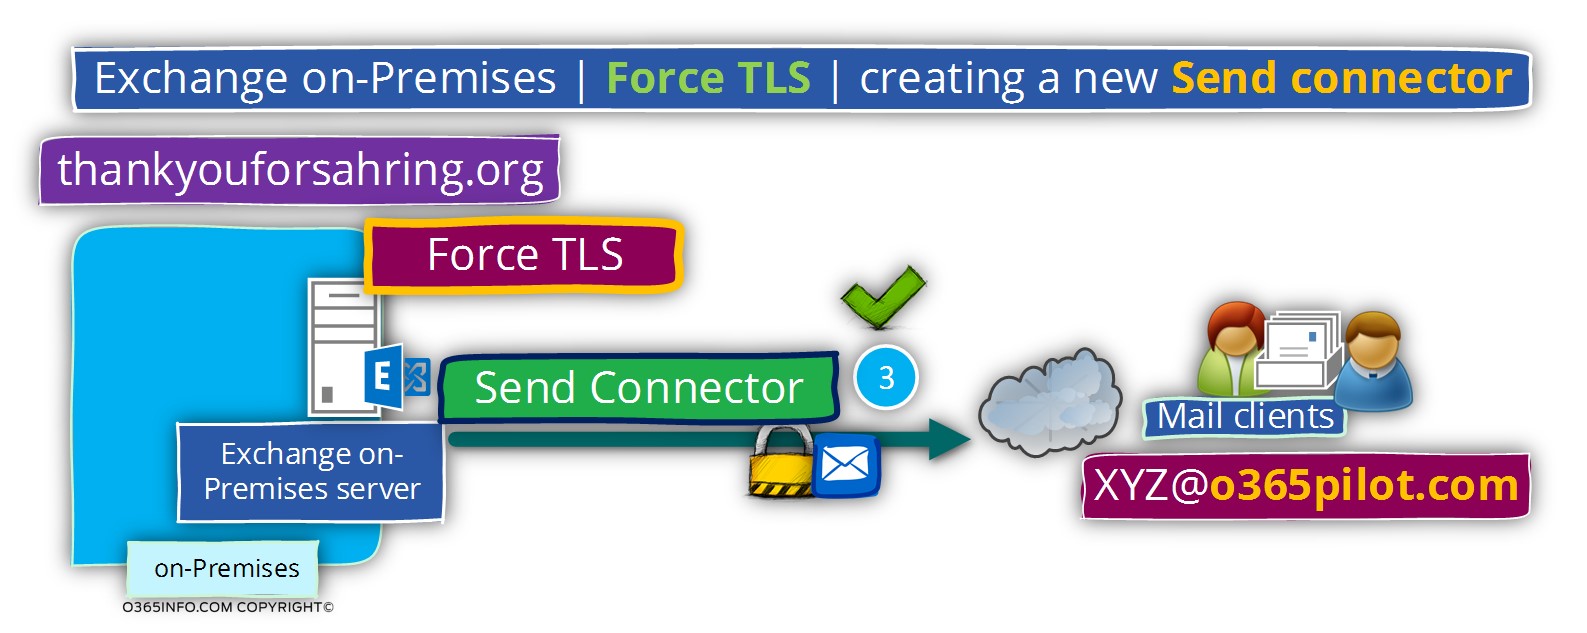 Exchange on-Premises - Force TLS - creating a new Send connector -03